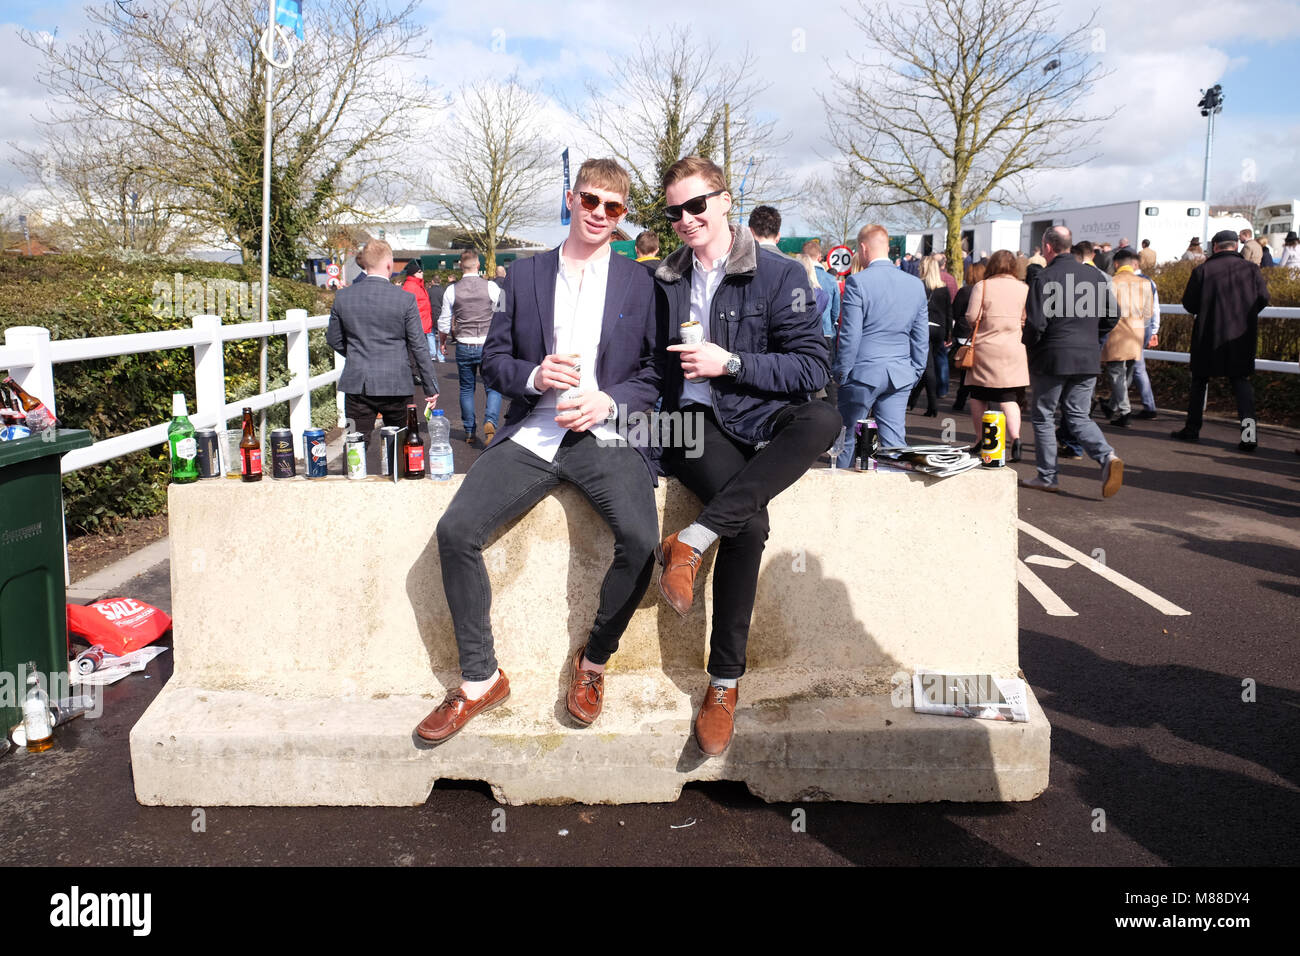 Cheltenham Festival, Gloucestershire, UK - Friday 16th March 2018 - Young race goers enjoy a drink as they arrive at the Cheltenham racing festival ahead of this afternoons classic Gold Cup race.  Steven May / Alamy Live News Stock Photo